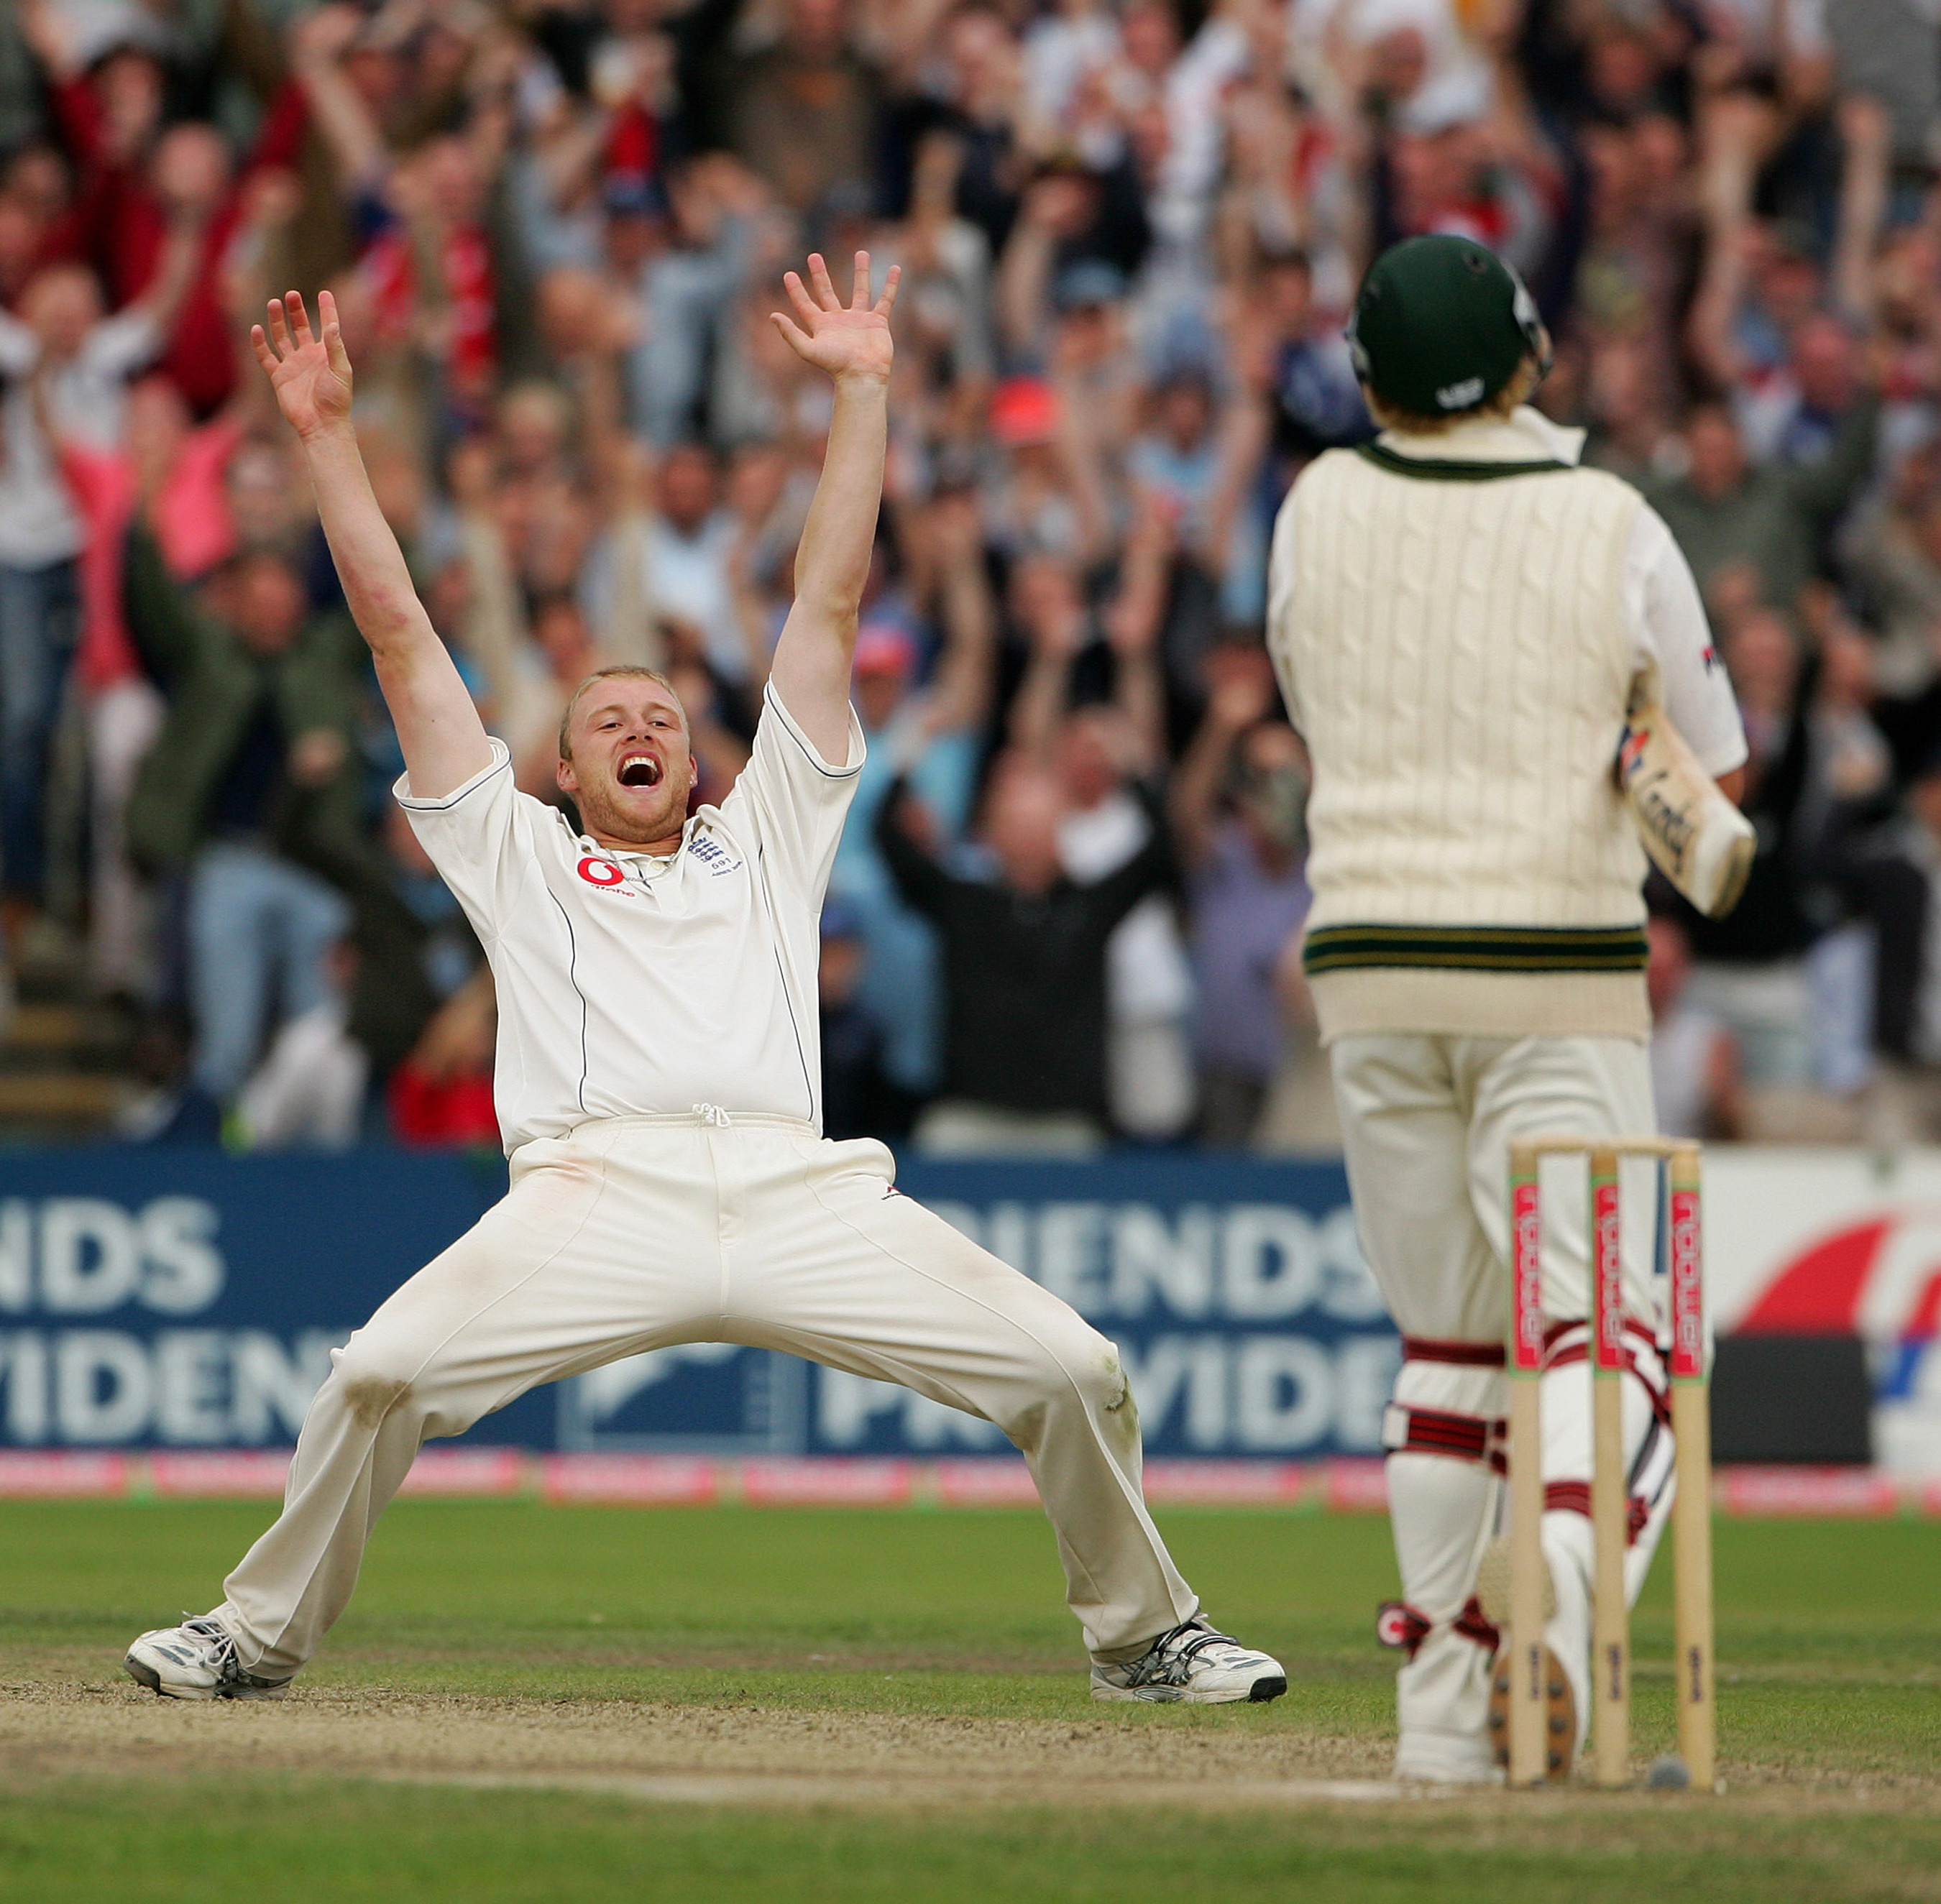 England's Andrew Flintoff celebrates after getting the wicket of Australia's Shane Warne on the final day during the 3rd Ashes cricket Test match between England and Australia at Old Trafford, Manchester England on the 15th of August 2005. (Photo by Philip Brown/Popperfoto/Getty Images)